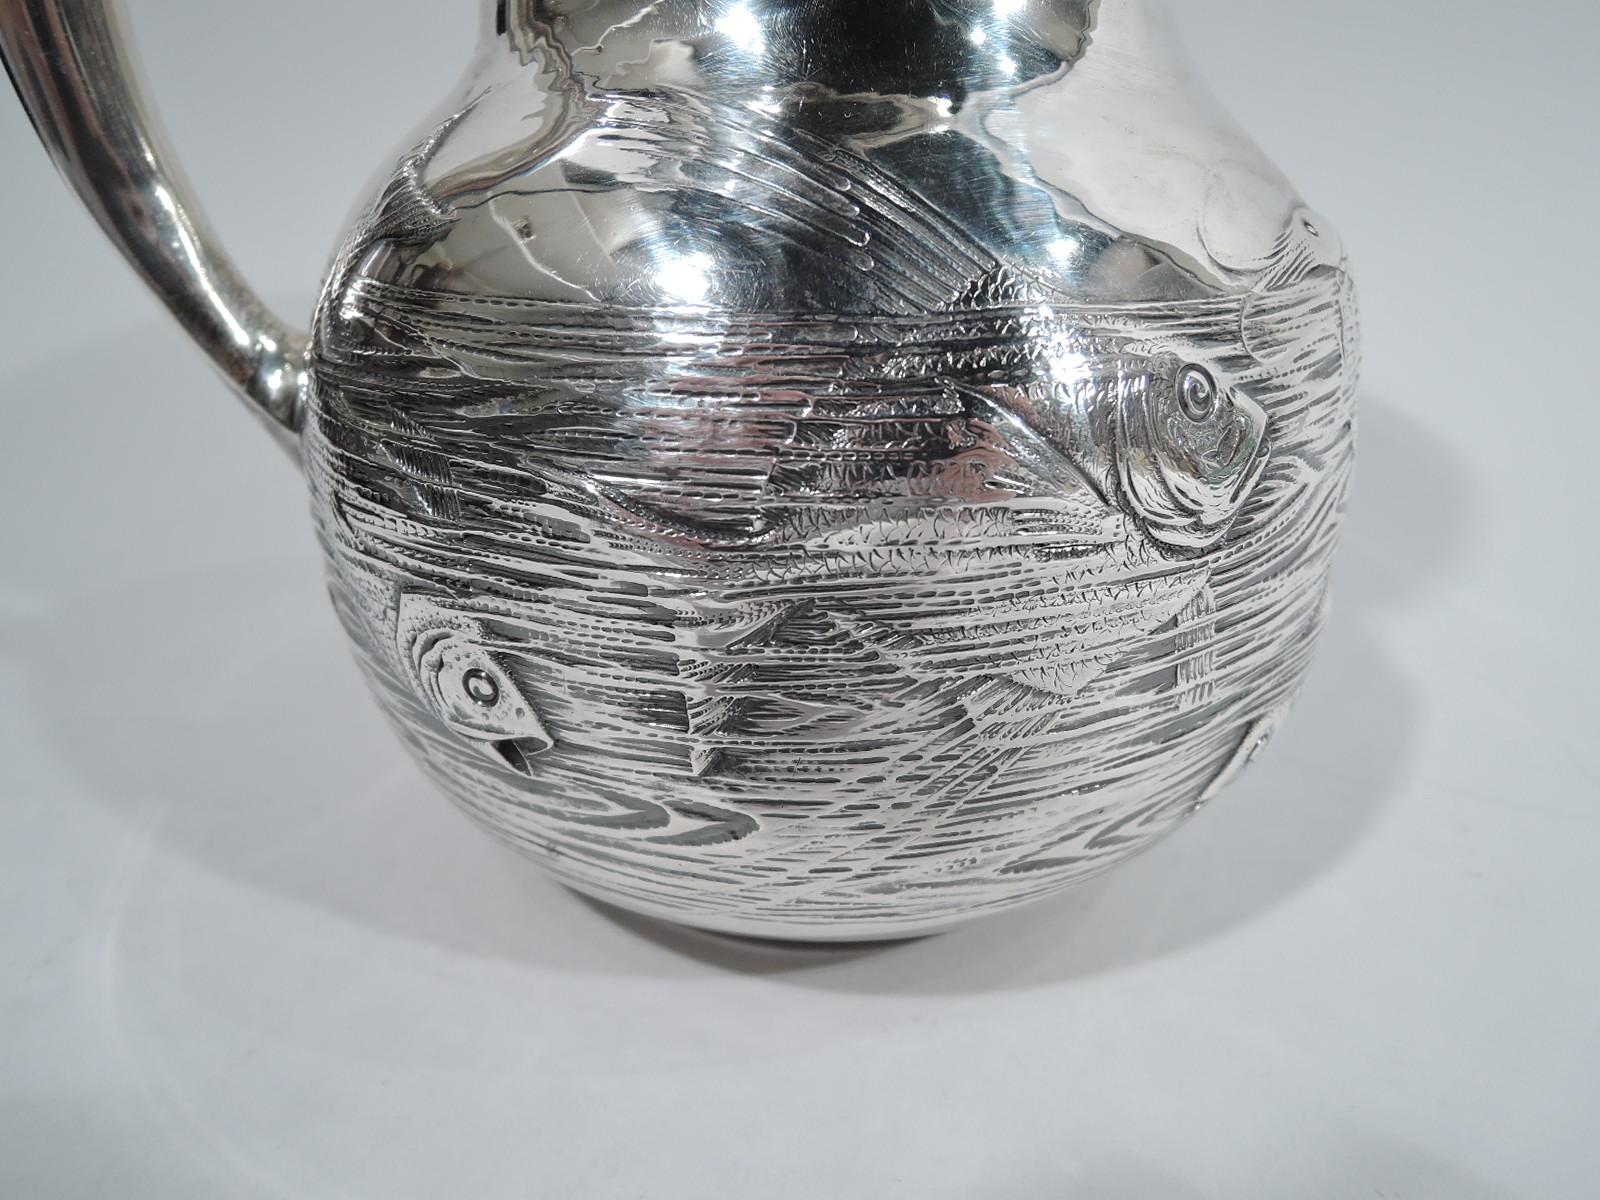 Late 19th Century Antique Gorham Japonesque Sterling Silver Fishbowl Water Pitcher